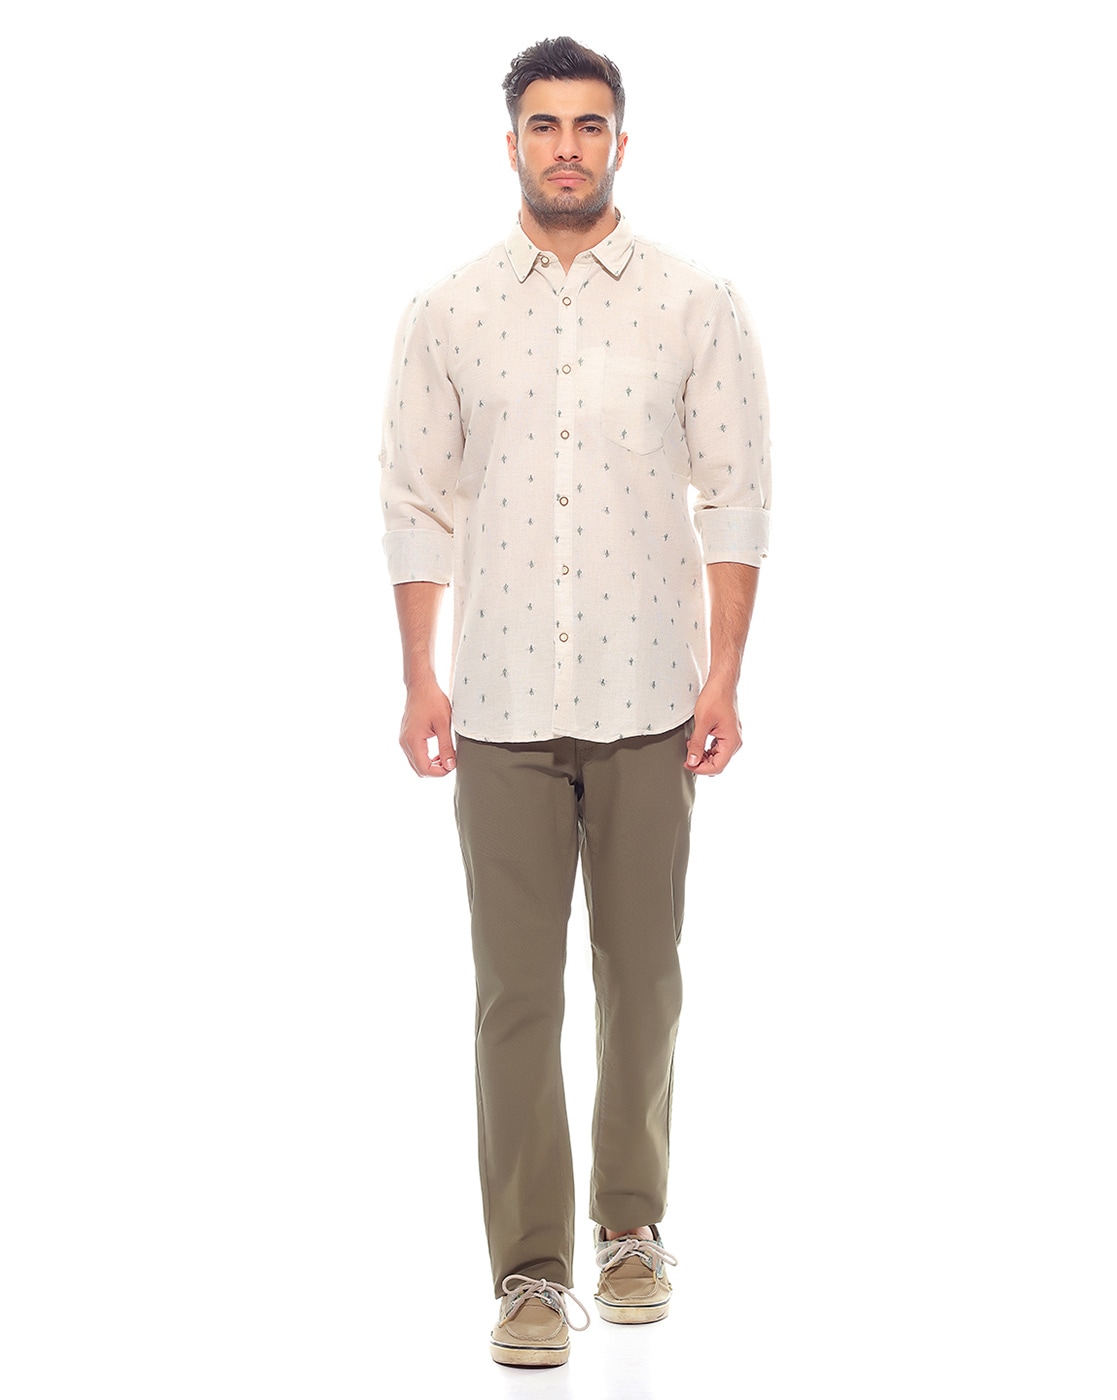 Buy White Shirts for Men by Buffalo Online